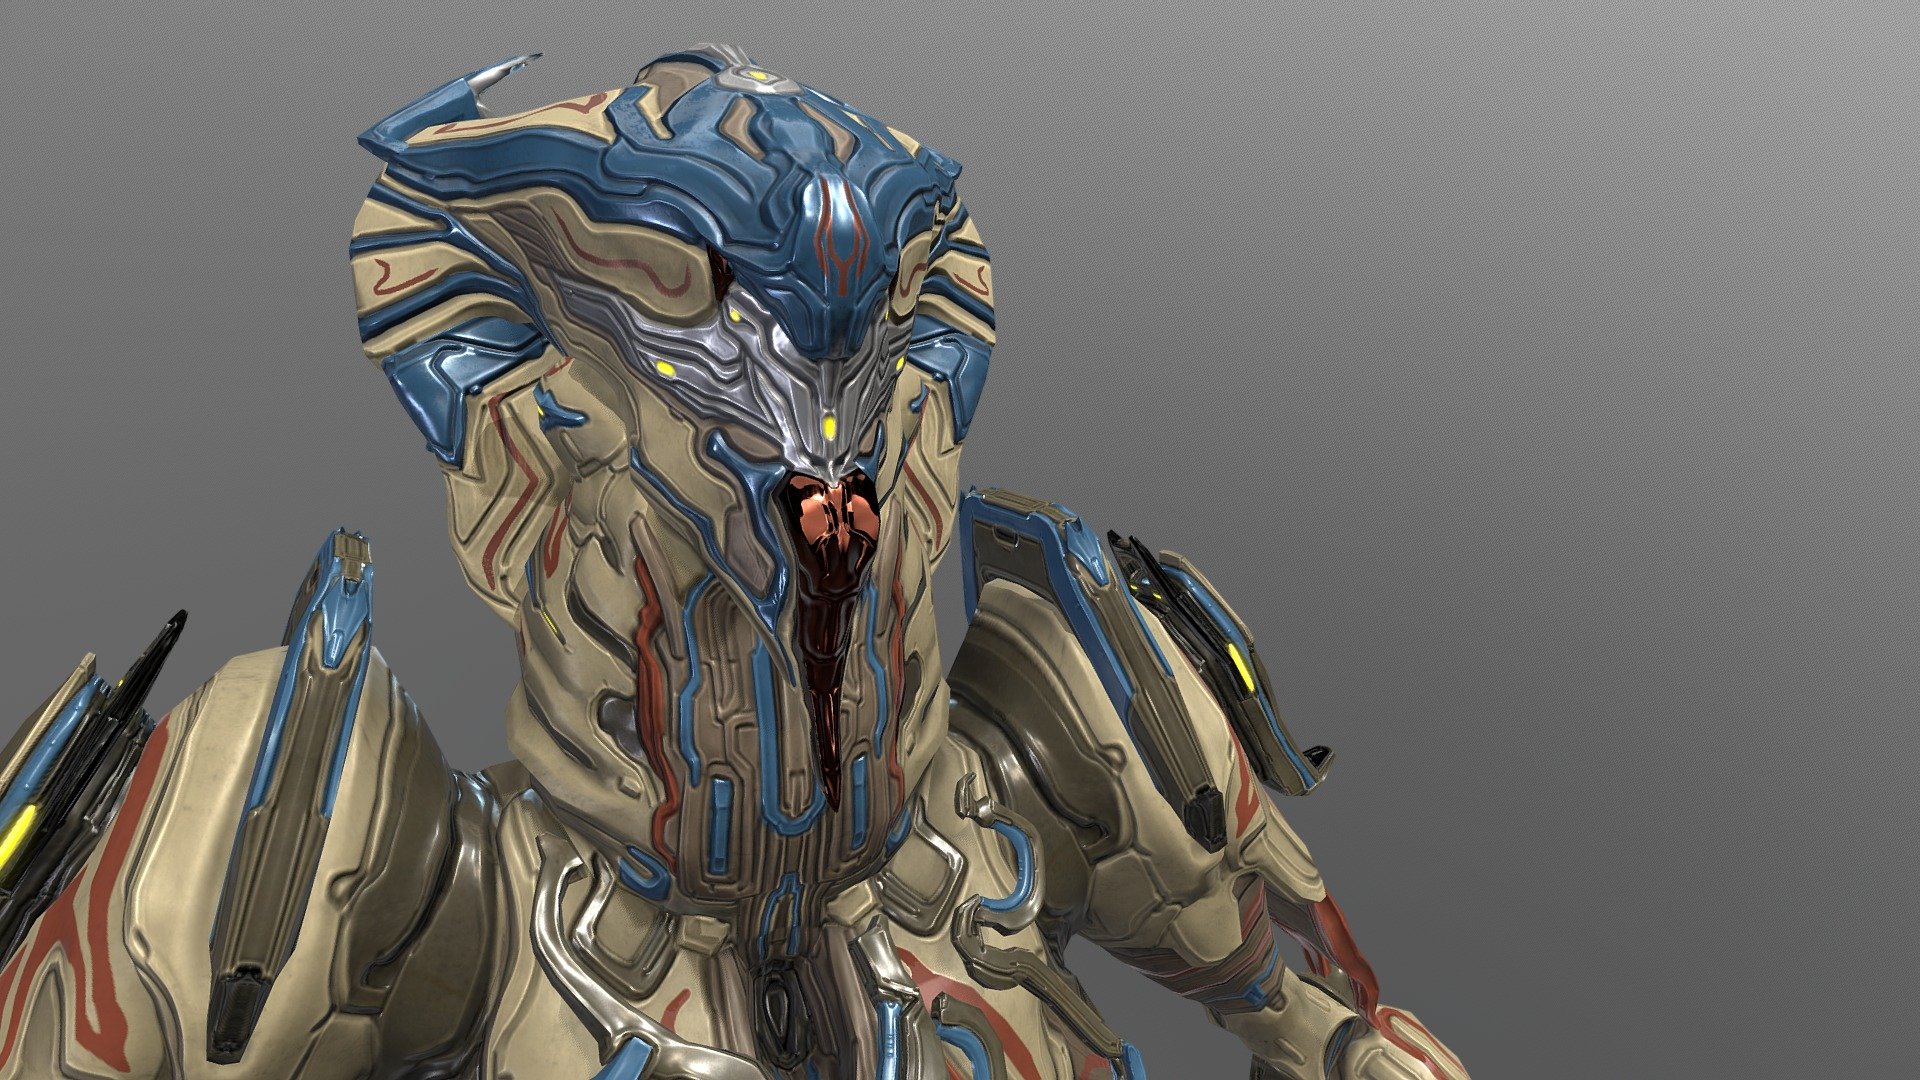 Collaboration by me (Crackle2012) &amp; Hydroxate for Warframe - Tennogen.

Inaros Alternate Helmet - Inaros Apep Helmet

Original Character - Inaros, Body Basemesh, and Body Textures belong to Digital Extremes.

See it on the workshop here:  https://steamcommunity.com/sharedfiles/filedetails/?id=1392462850 - Inaros Apep Helmet By Crackle2012 & Hydroxate - 3D model by Ryan K. / Crackle2012 (@Crackle2012) 3d model